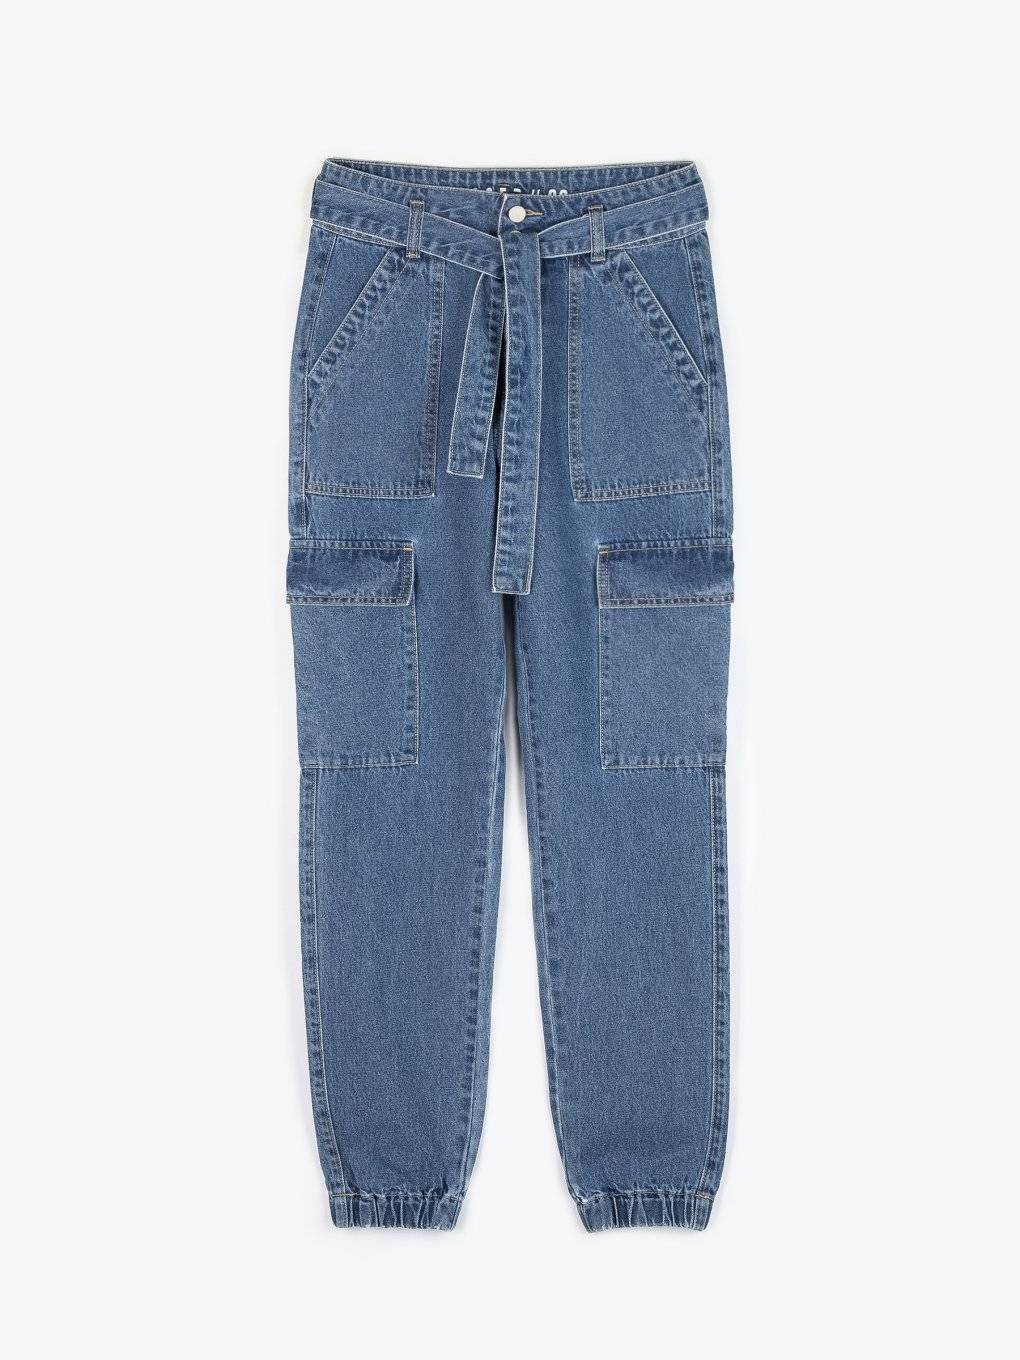 Jogger fit jeans with belt and side pockets